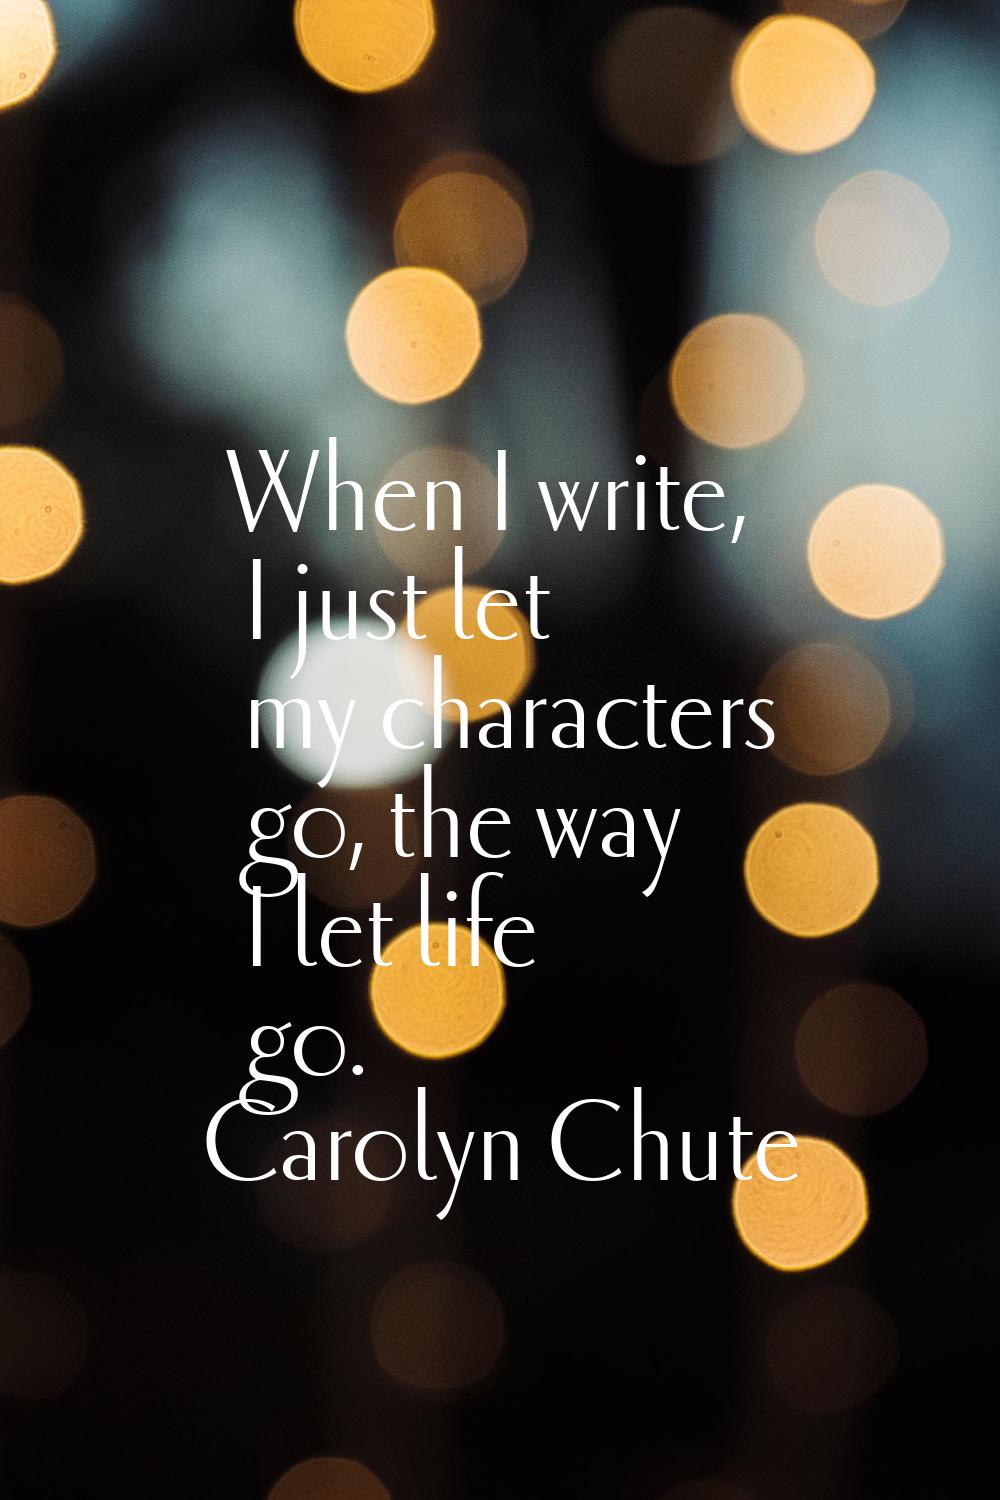 When I write, I just let my characters go, the way I let life go.